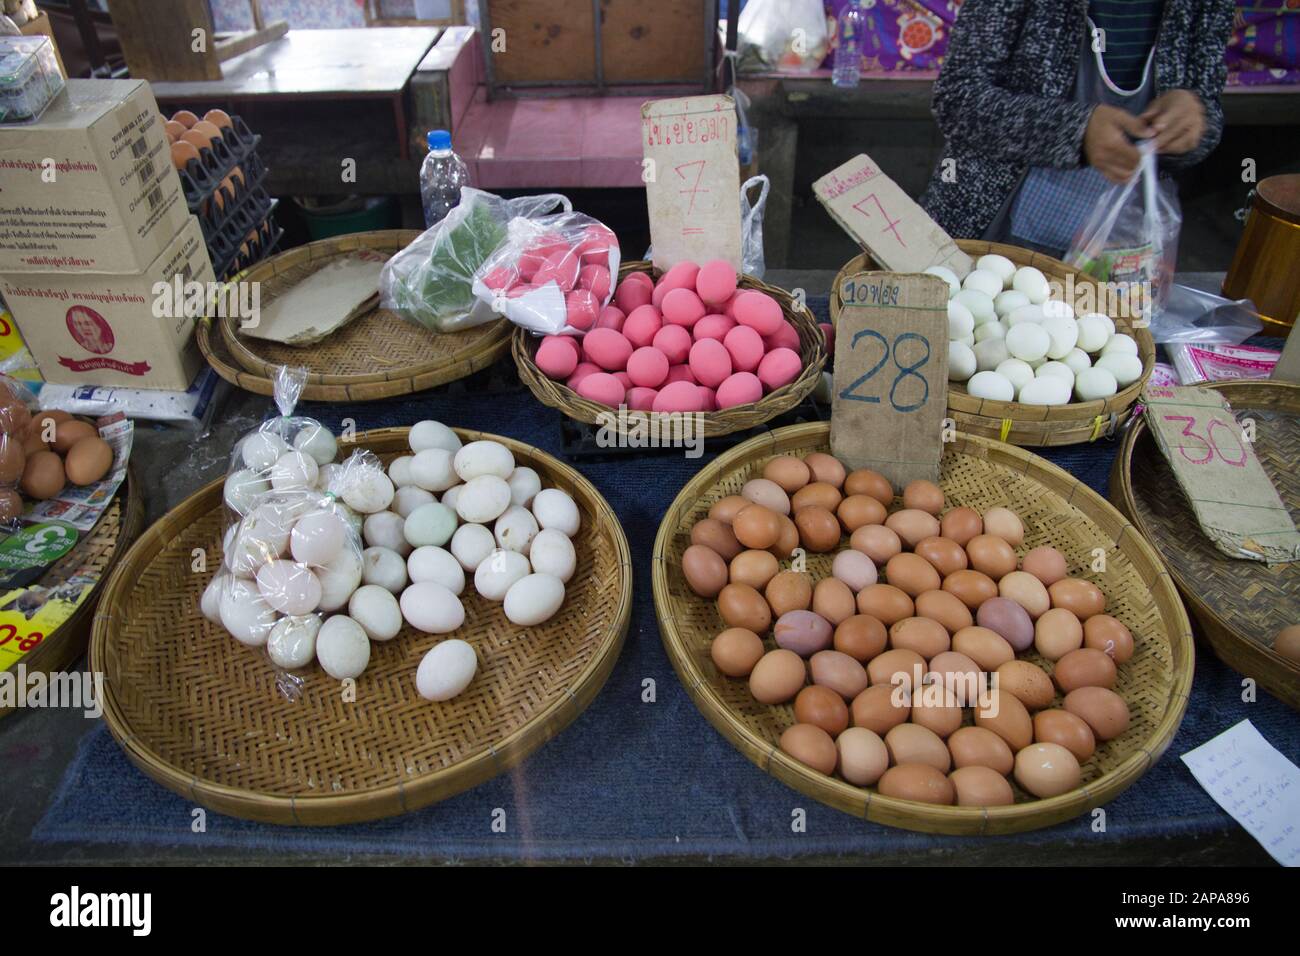 Eggs for sale in stall Thailand Chiang Mai Market Stock Photo